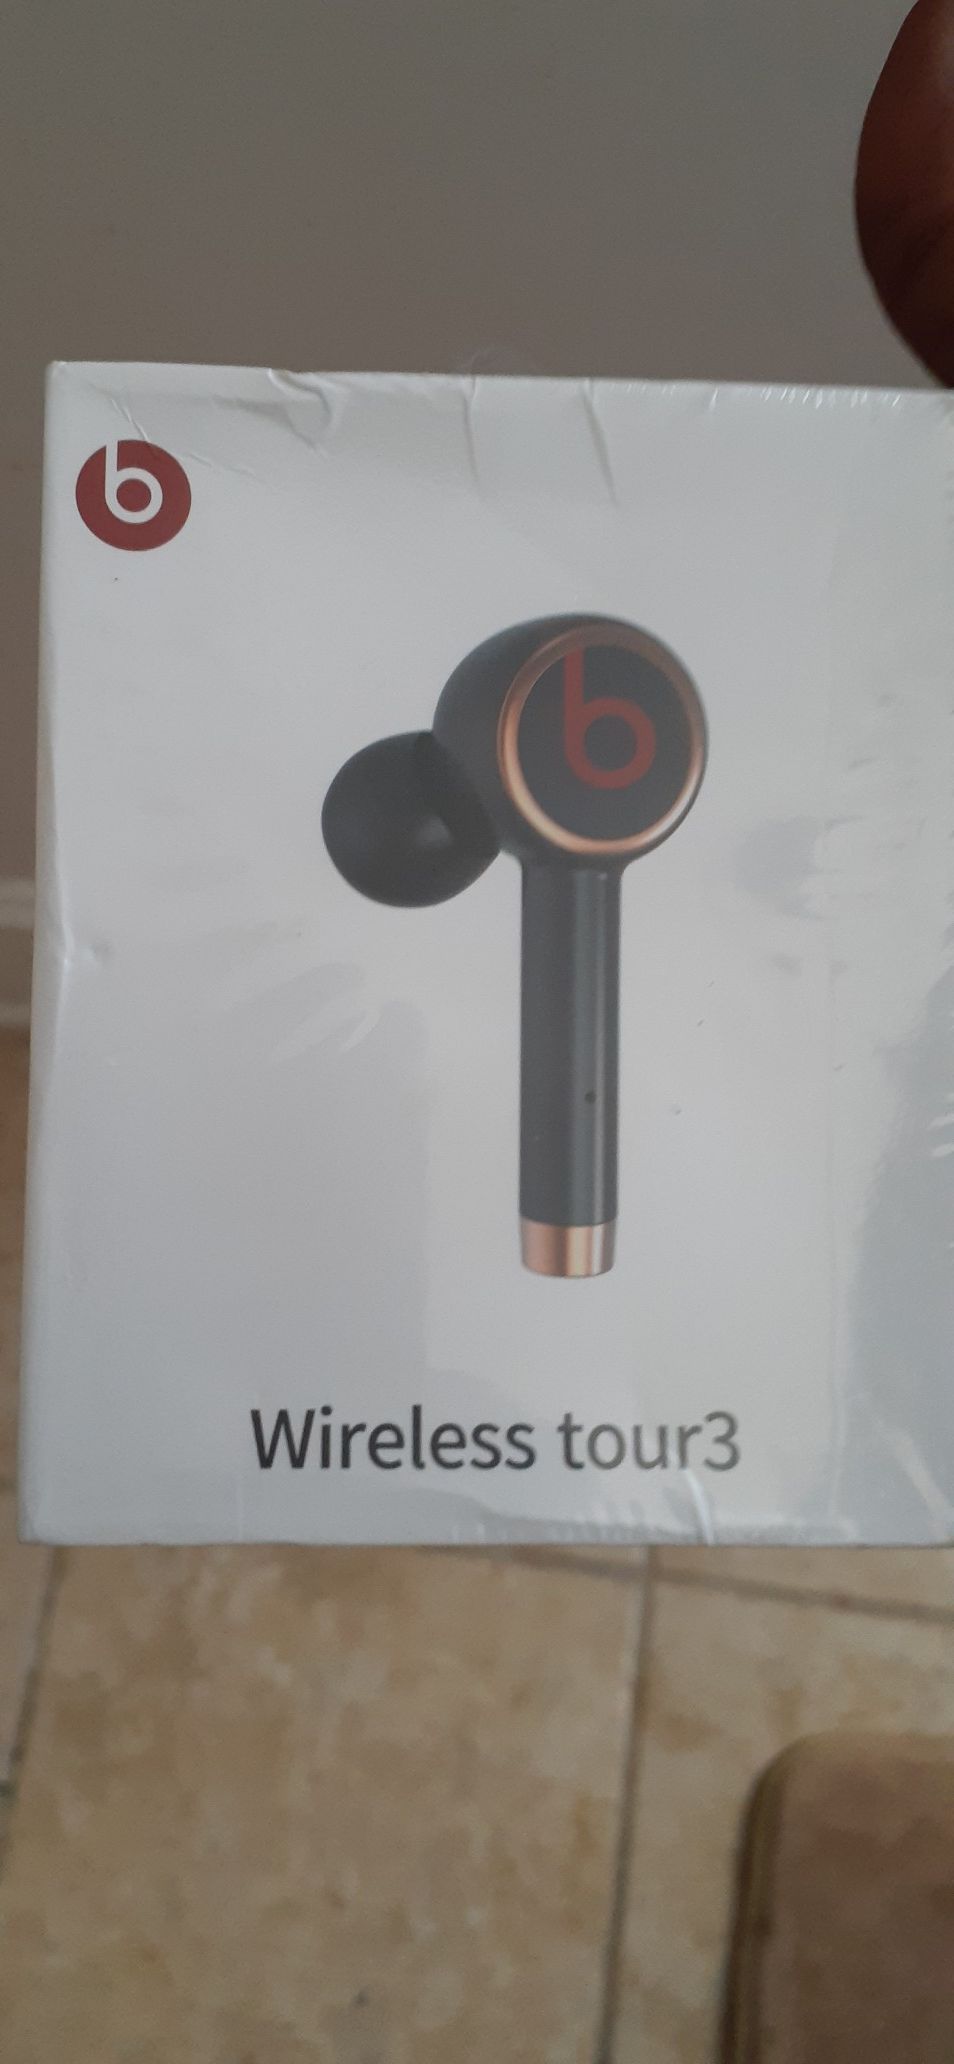 Dre Beats Tour3 Wireless touch bluetooth sweat resistant ear buds with wireless charging case.